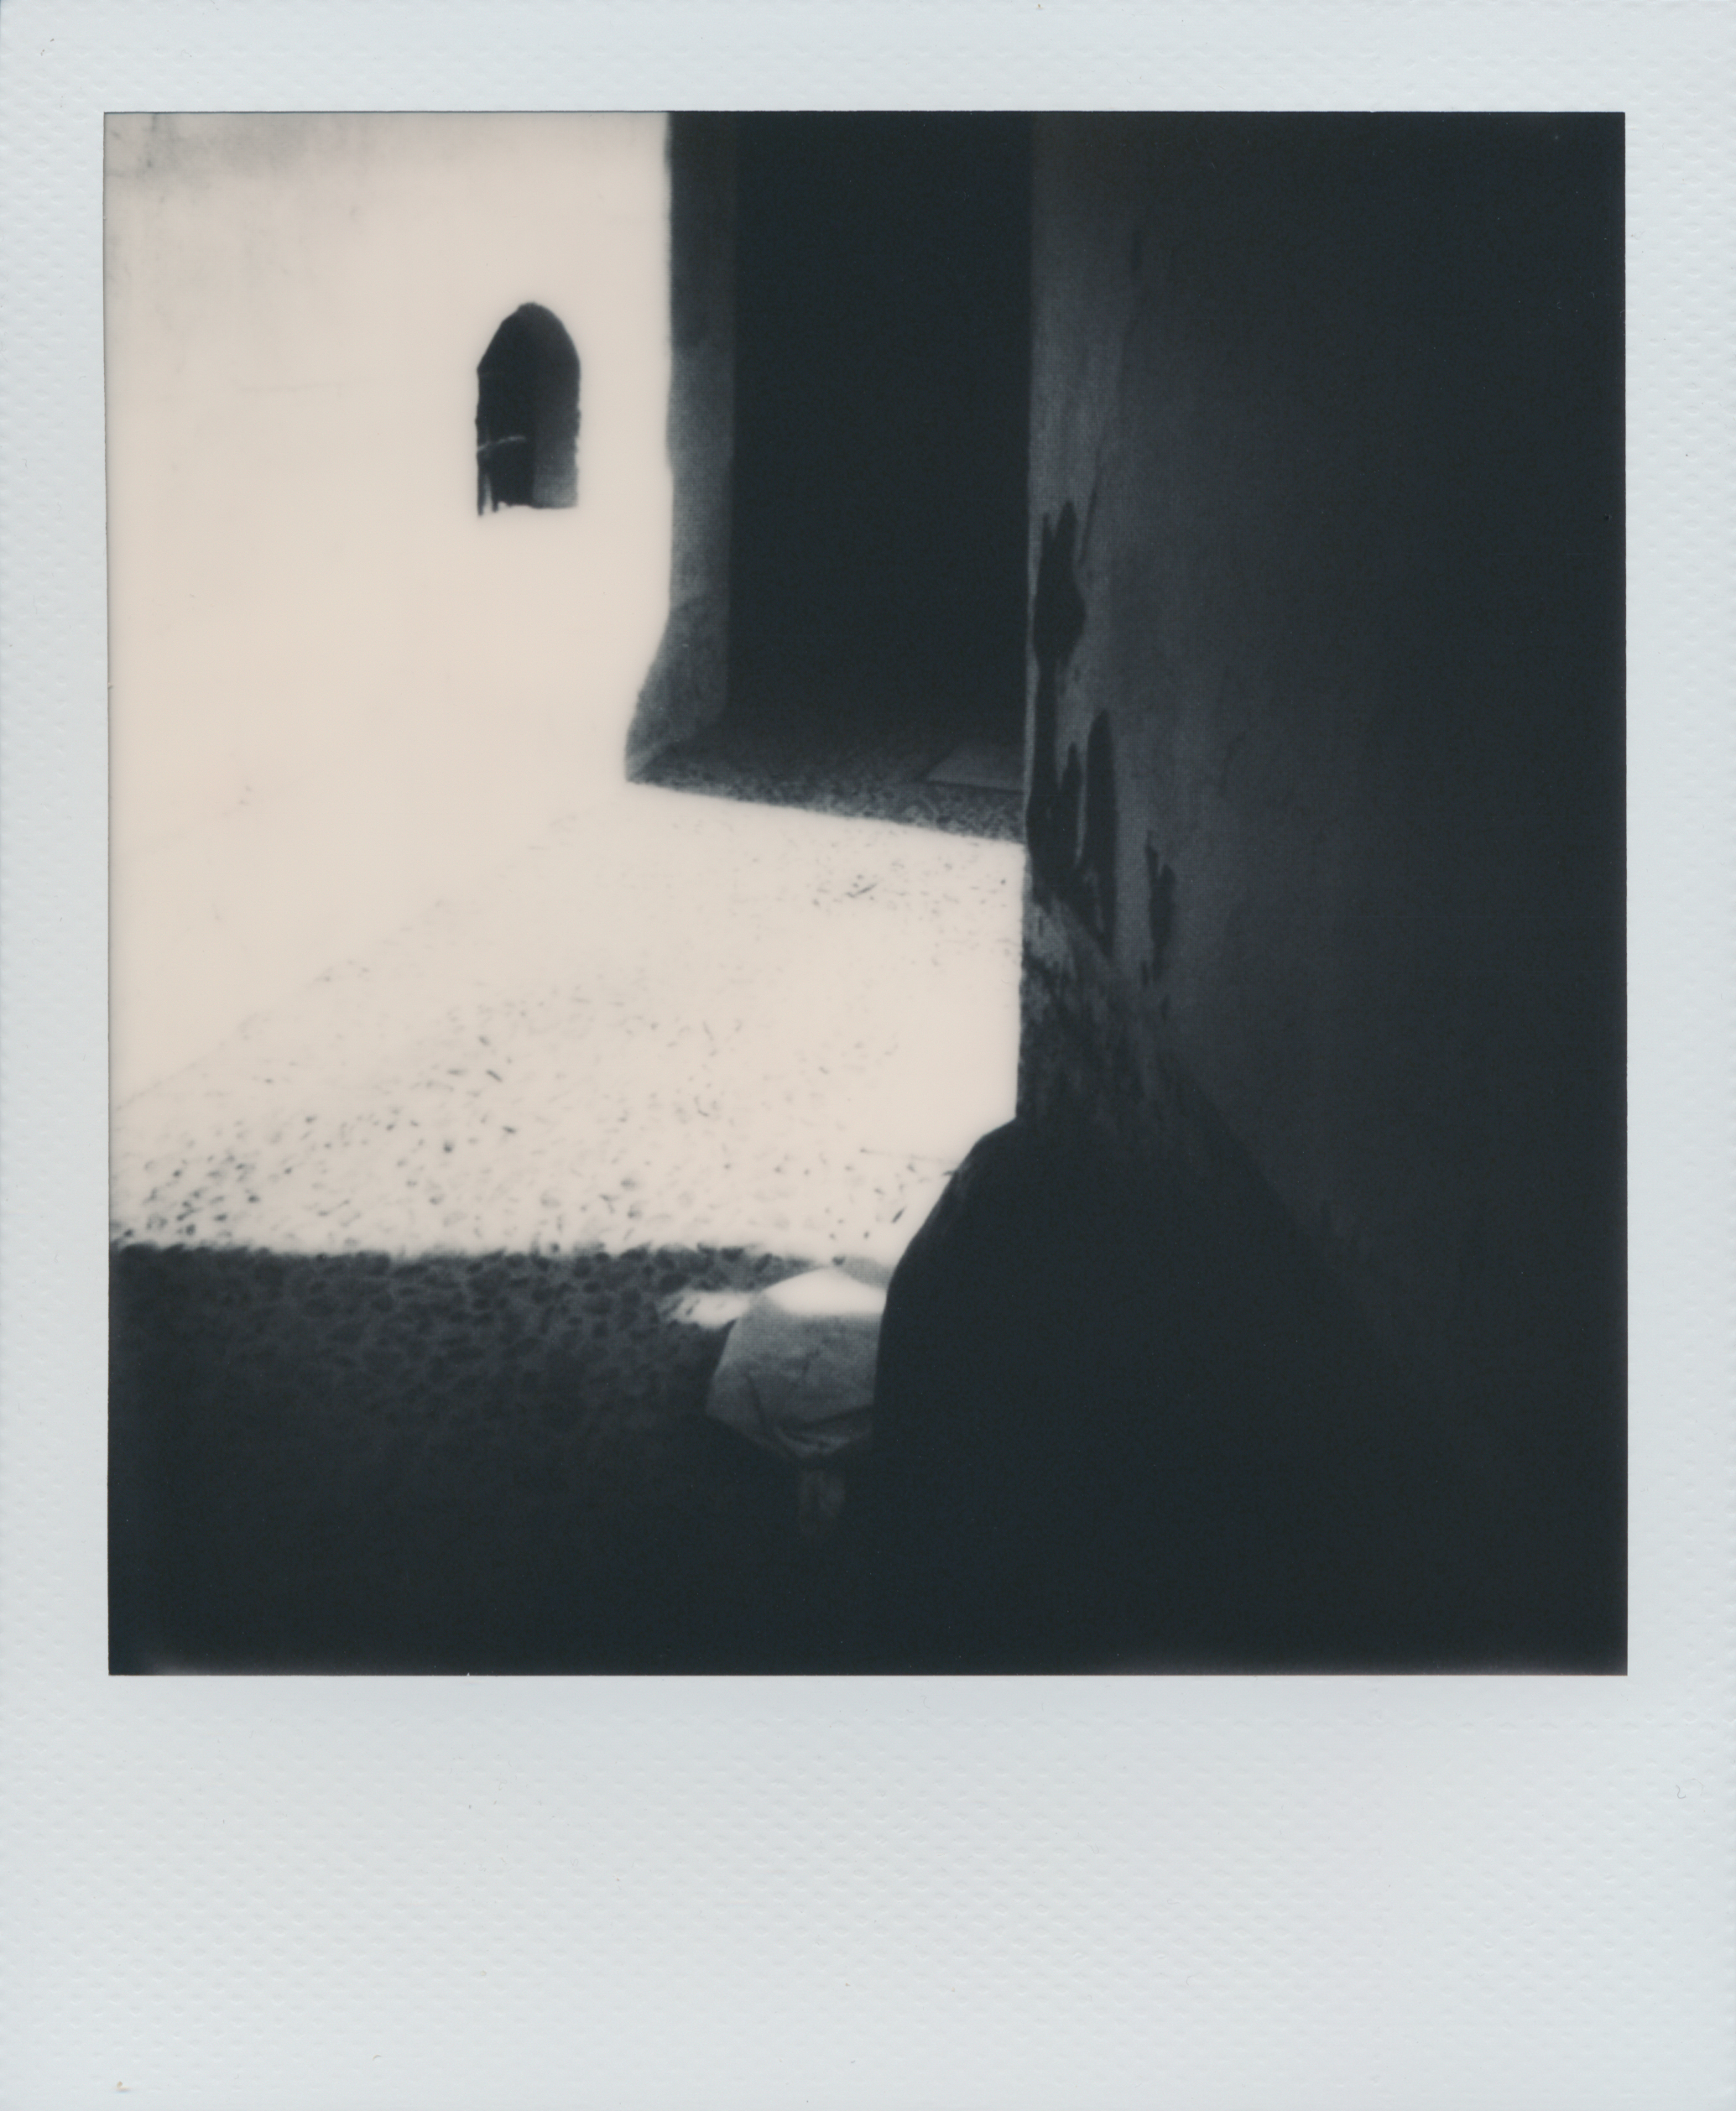 Malaga | Impossible Project Instant Lab | Impossible Project I-Type B/W Film | Per Forsström